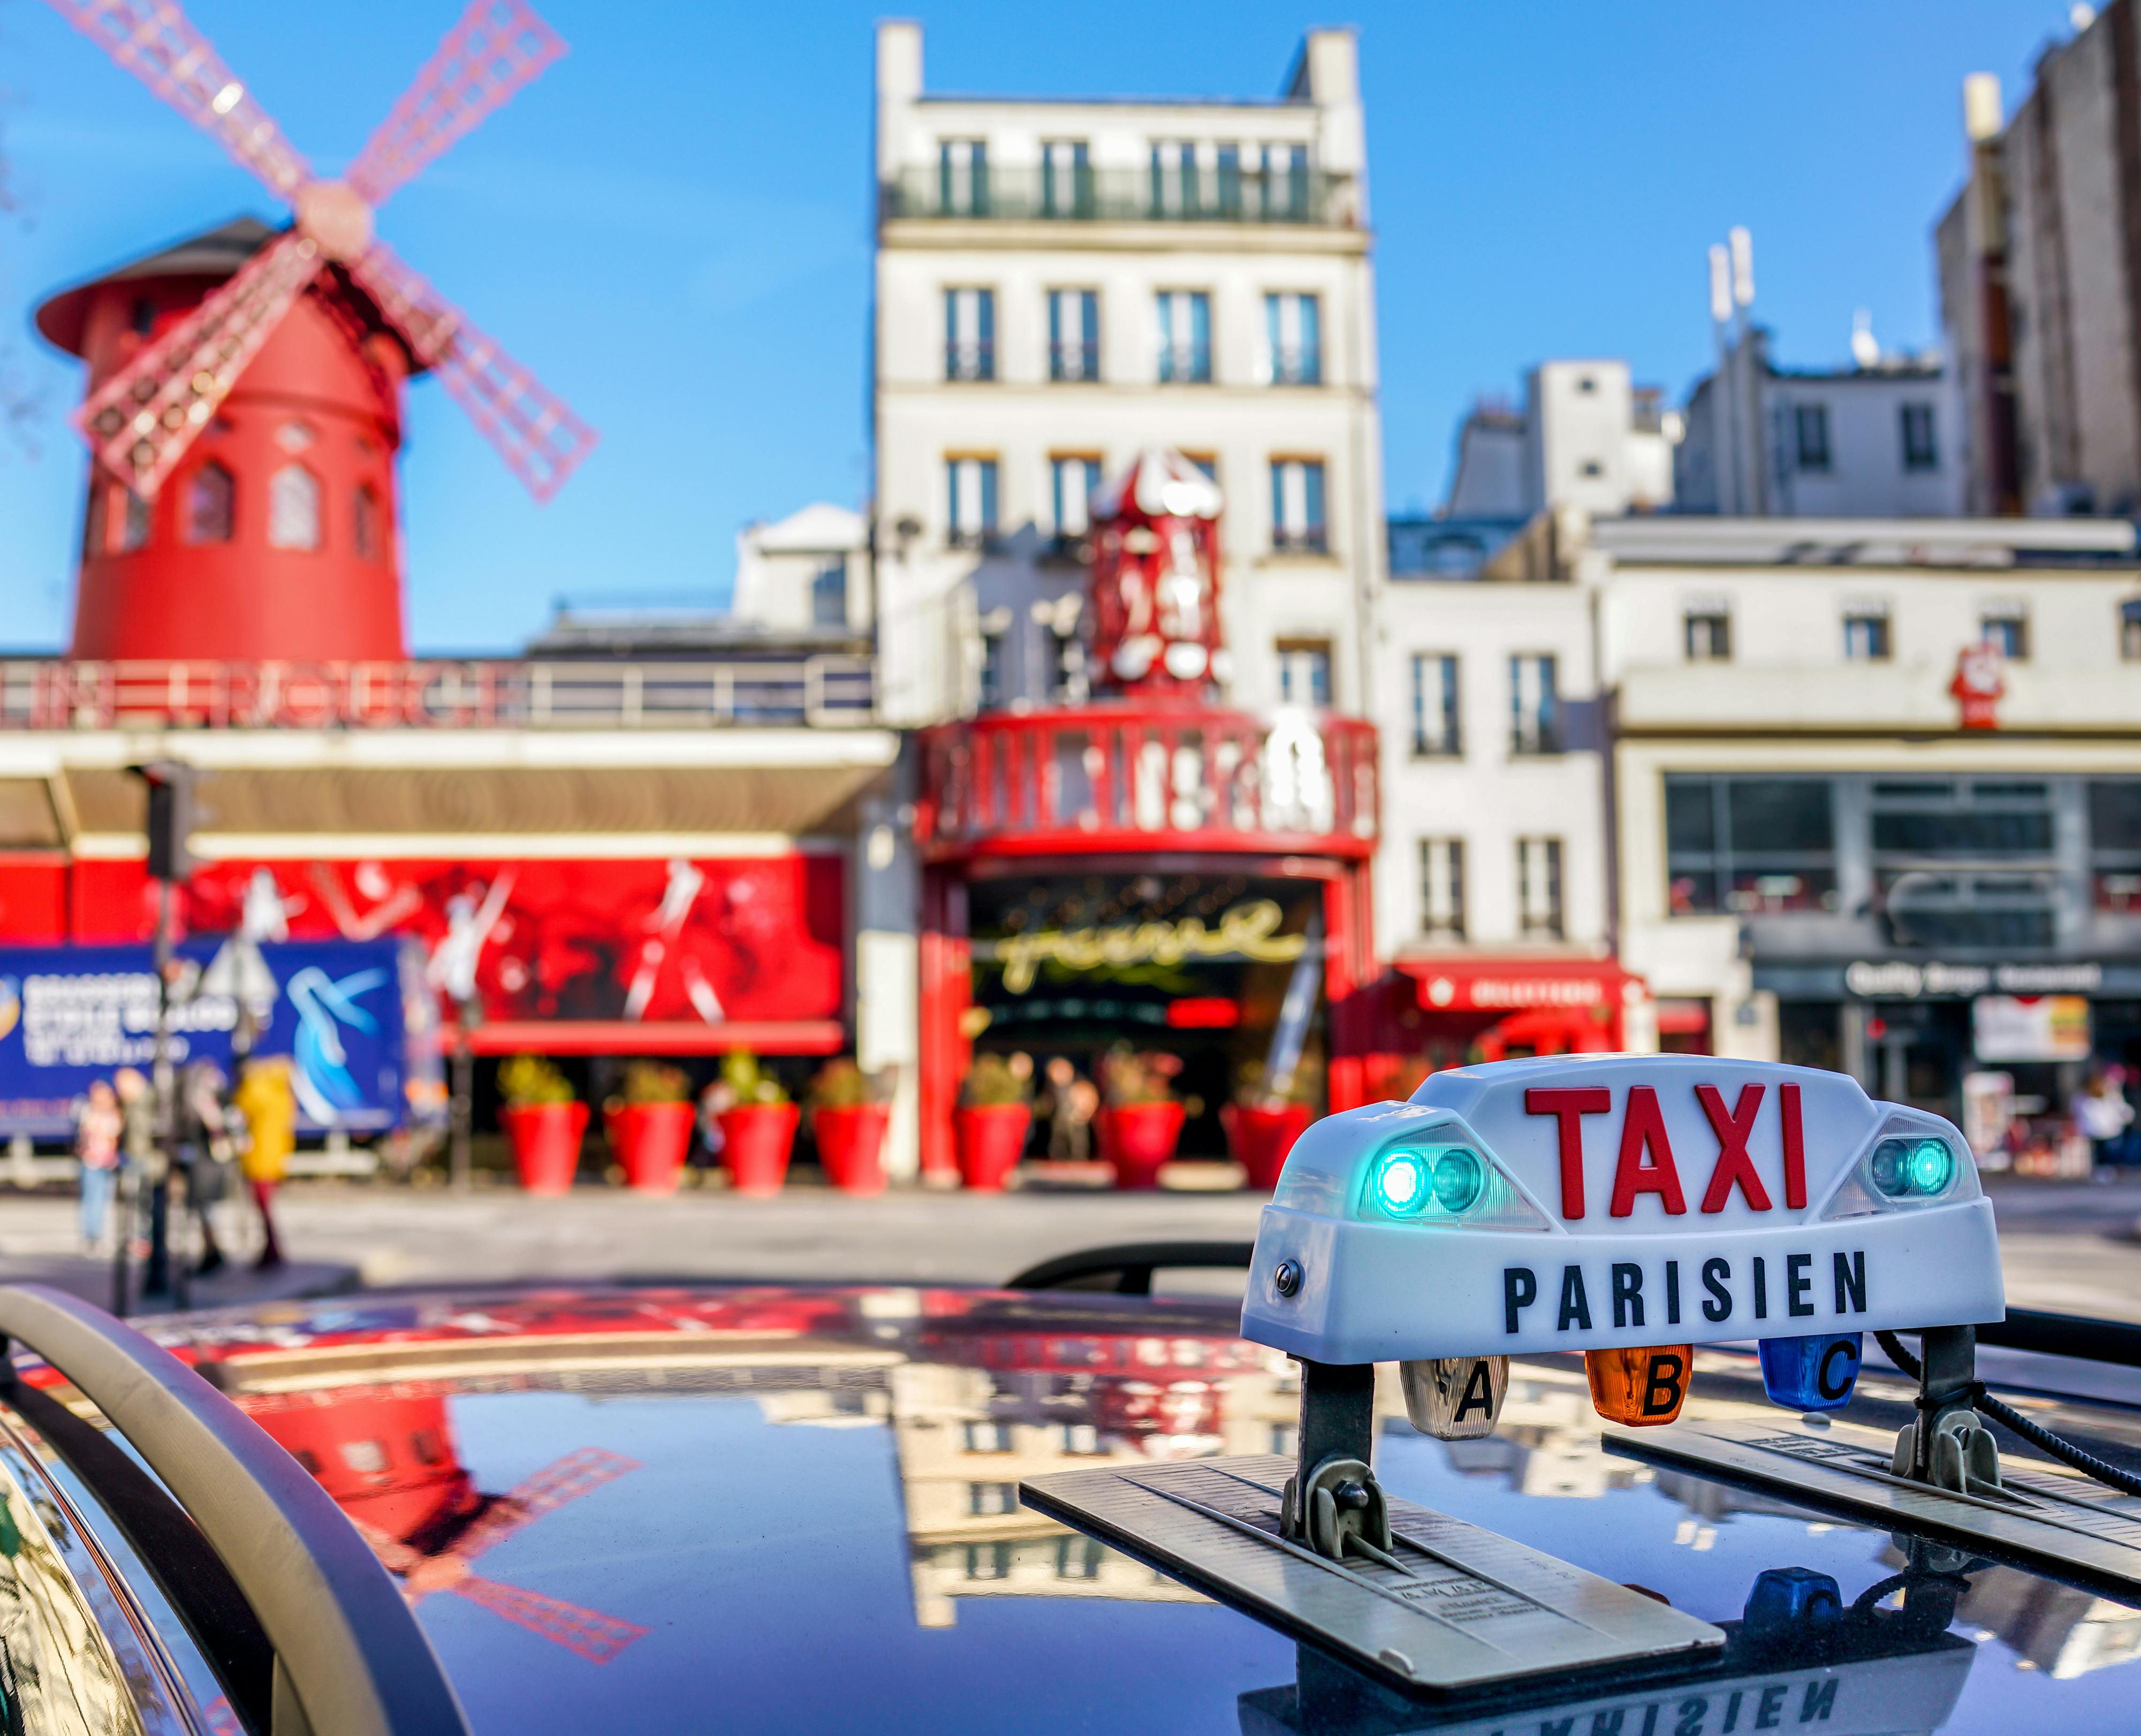 Interactive bus tour of Paris and dinner-show at the Moulin Rouge